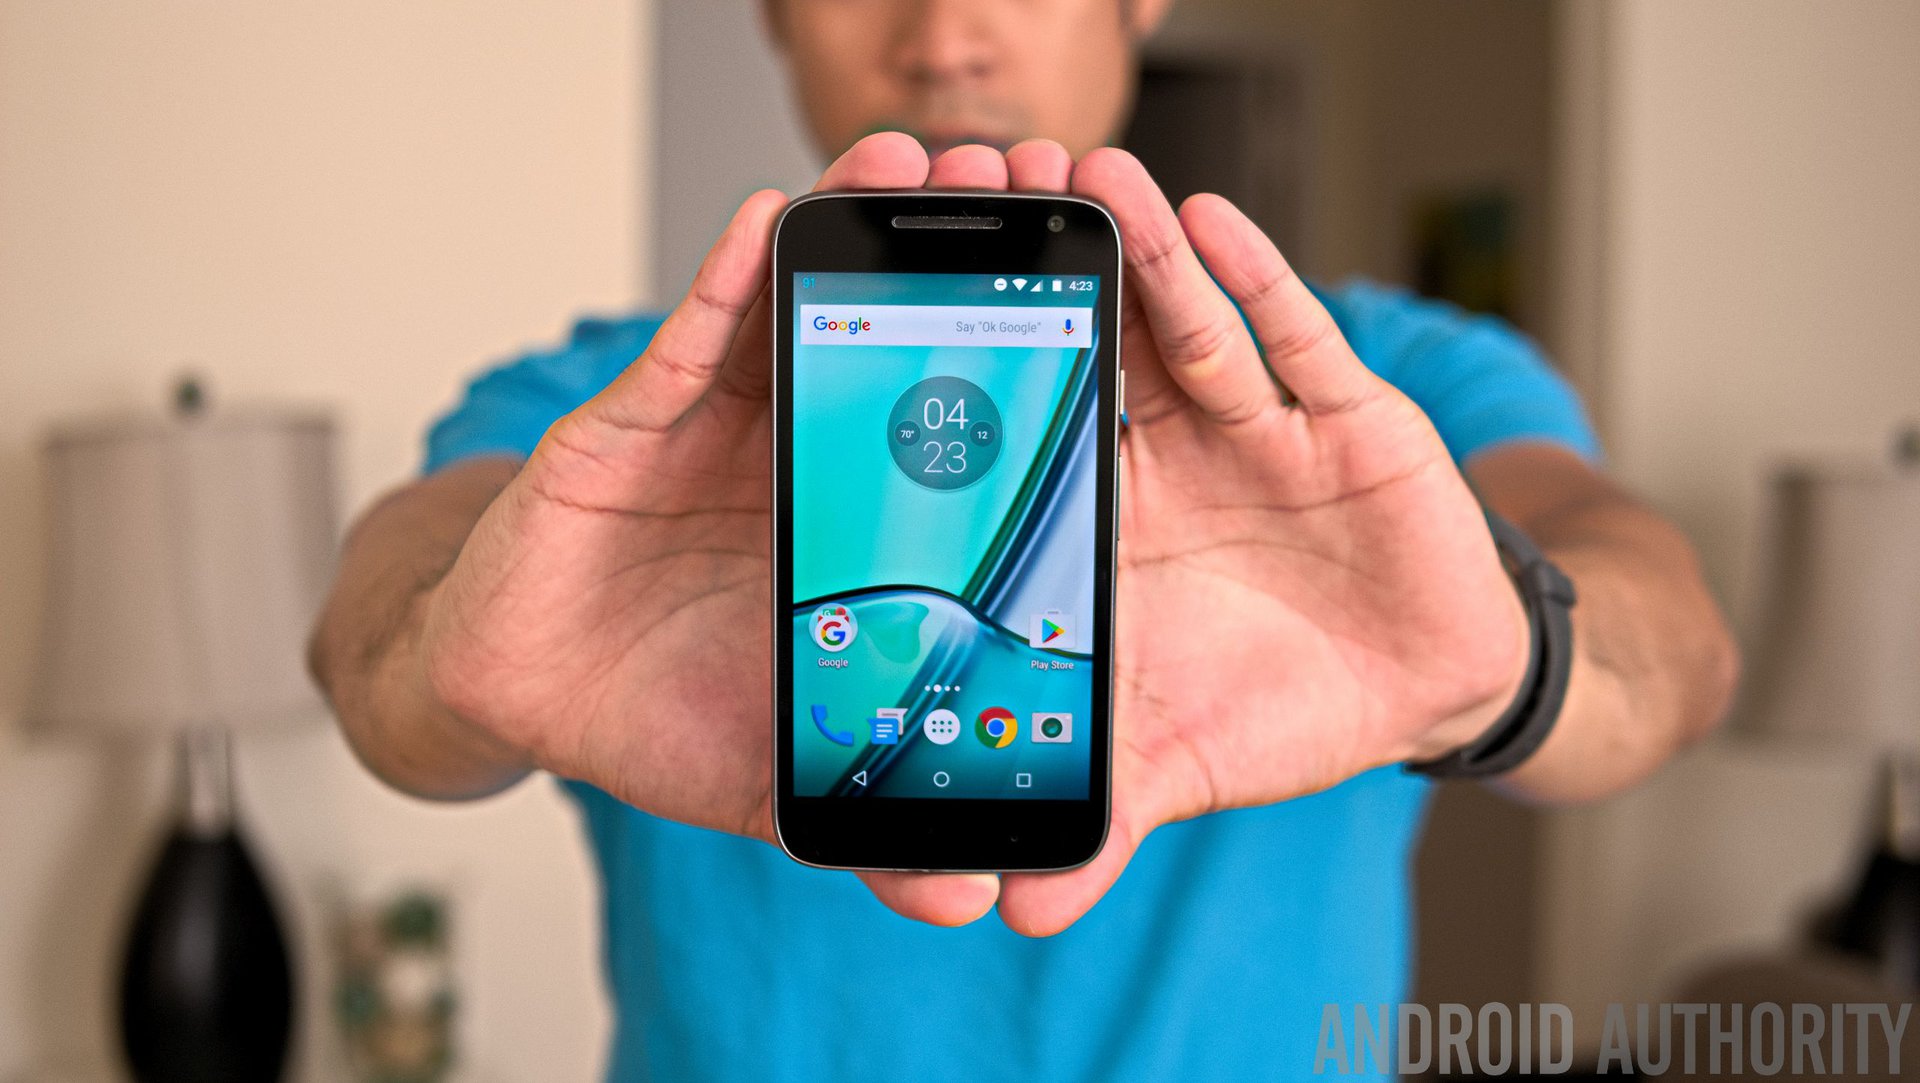 Moto G4 Play review: An affordable smartphone with just the essentials